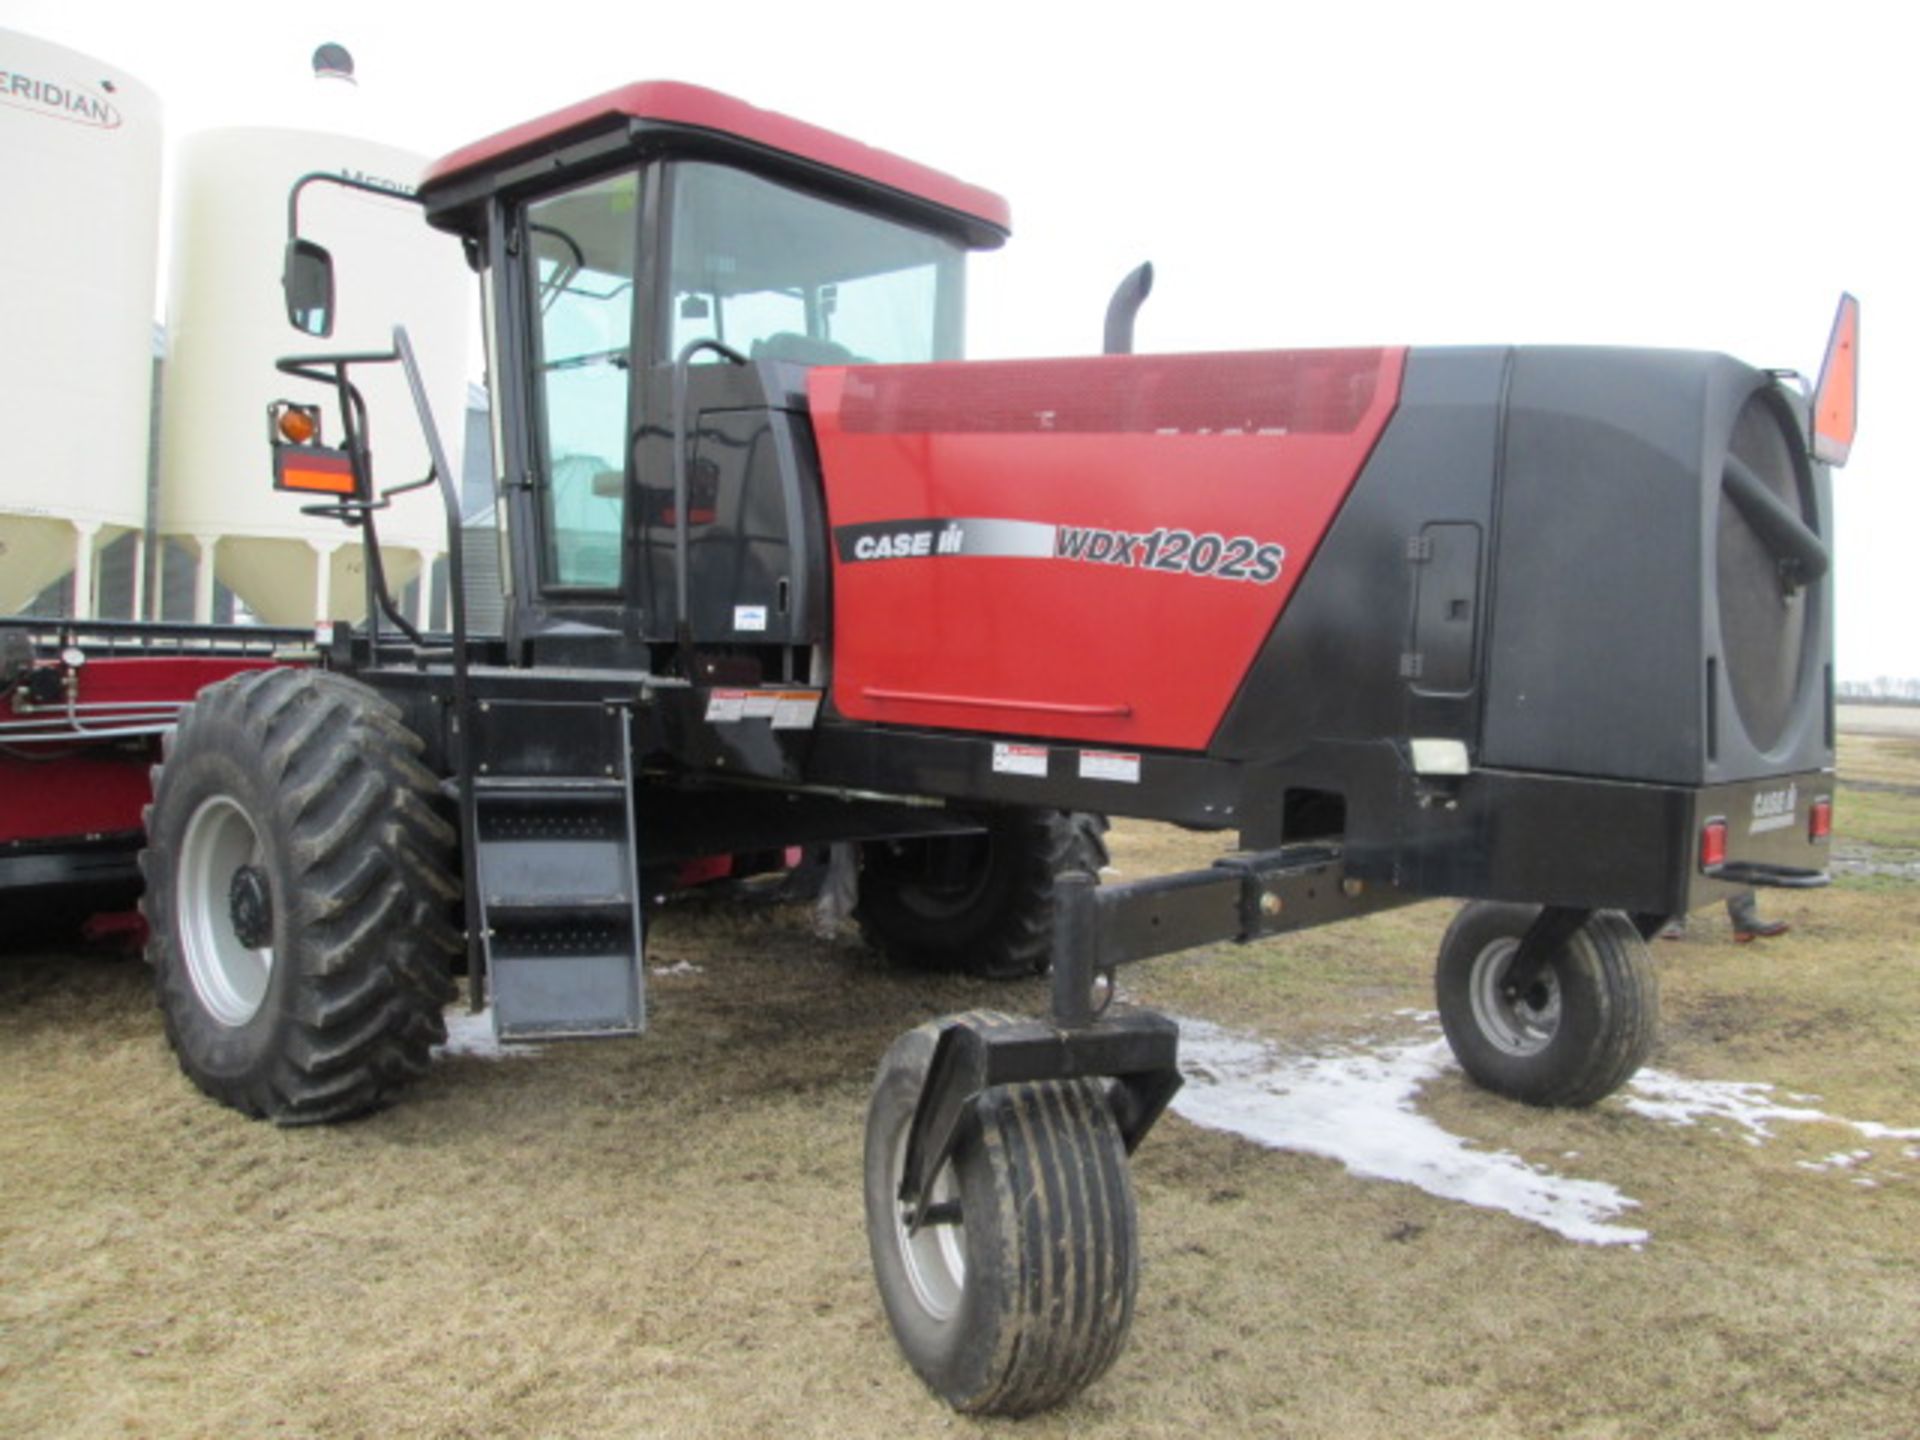 Case WDX 1202 S swather (2005), c/w 30' DHX 302 header (2007), showing 795 eng hr, dbl knife - Image 25 of 32